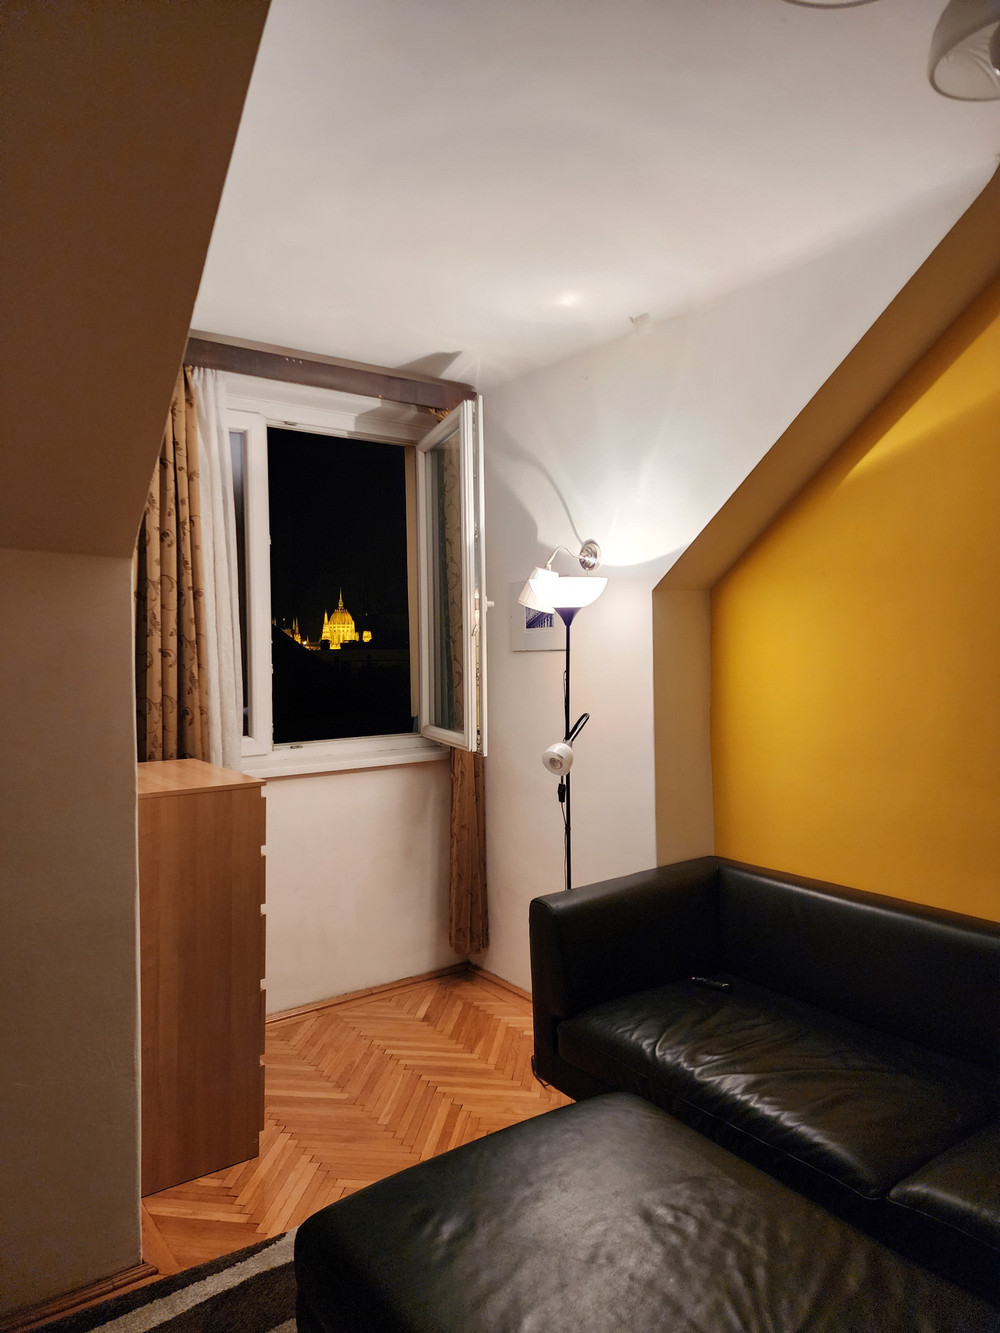 Top floor 62sqm flat in the centre of Buda!